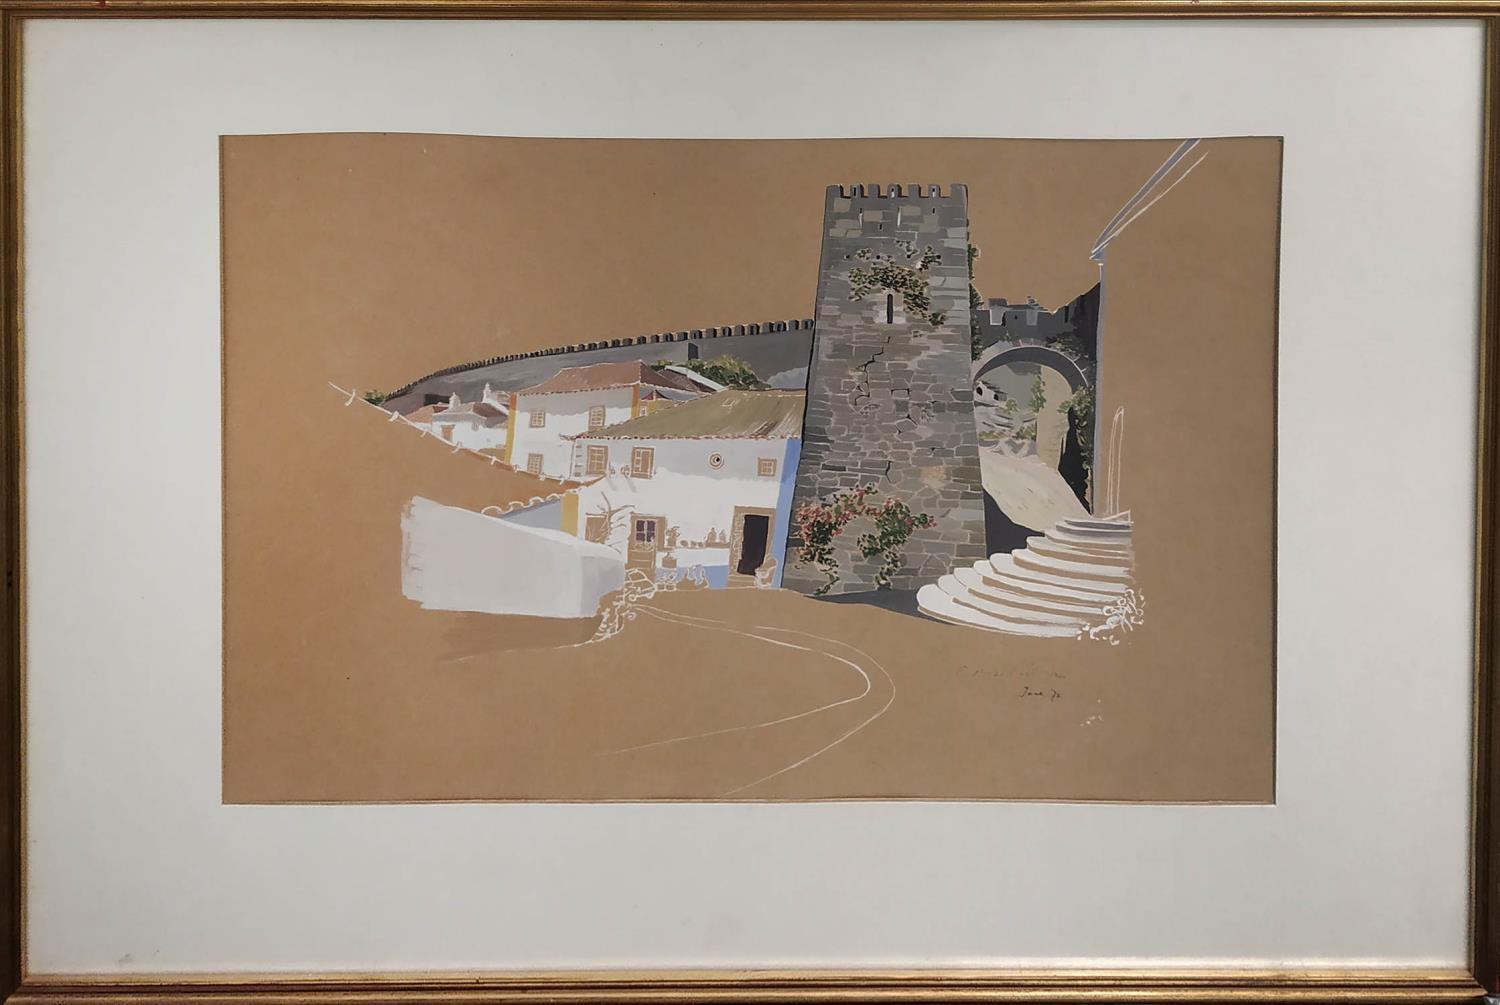 CHRIS MACCOLGAN 'Portugal', gouache on paper, signed and dated 1972, framed, 65cm x 50cm.